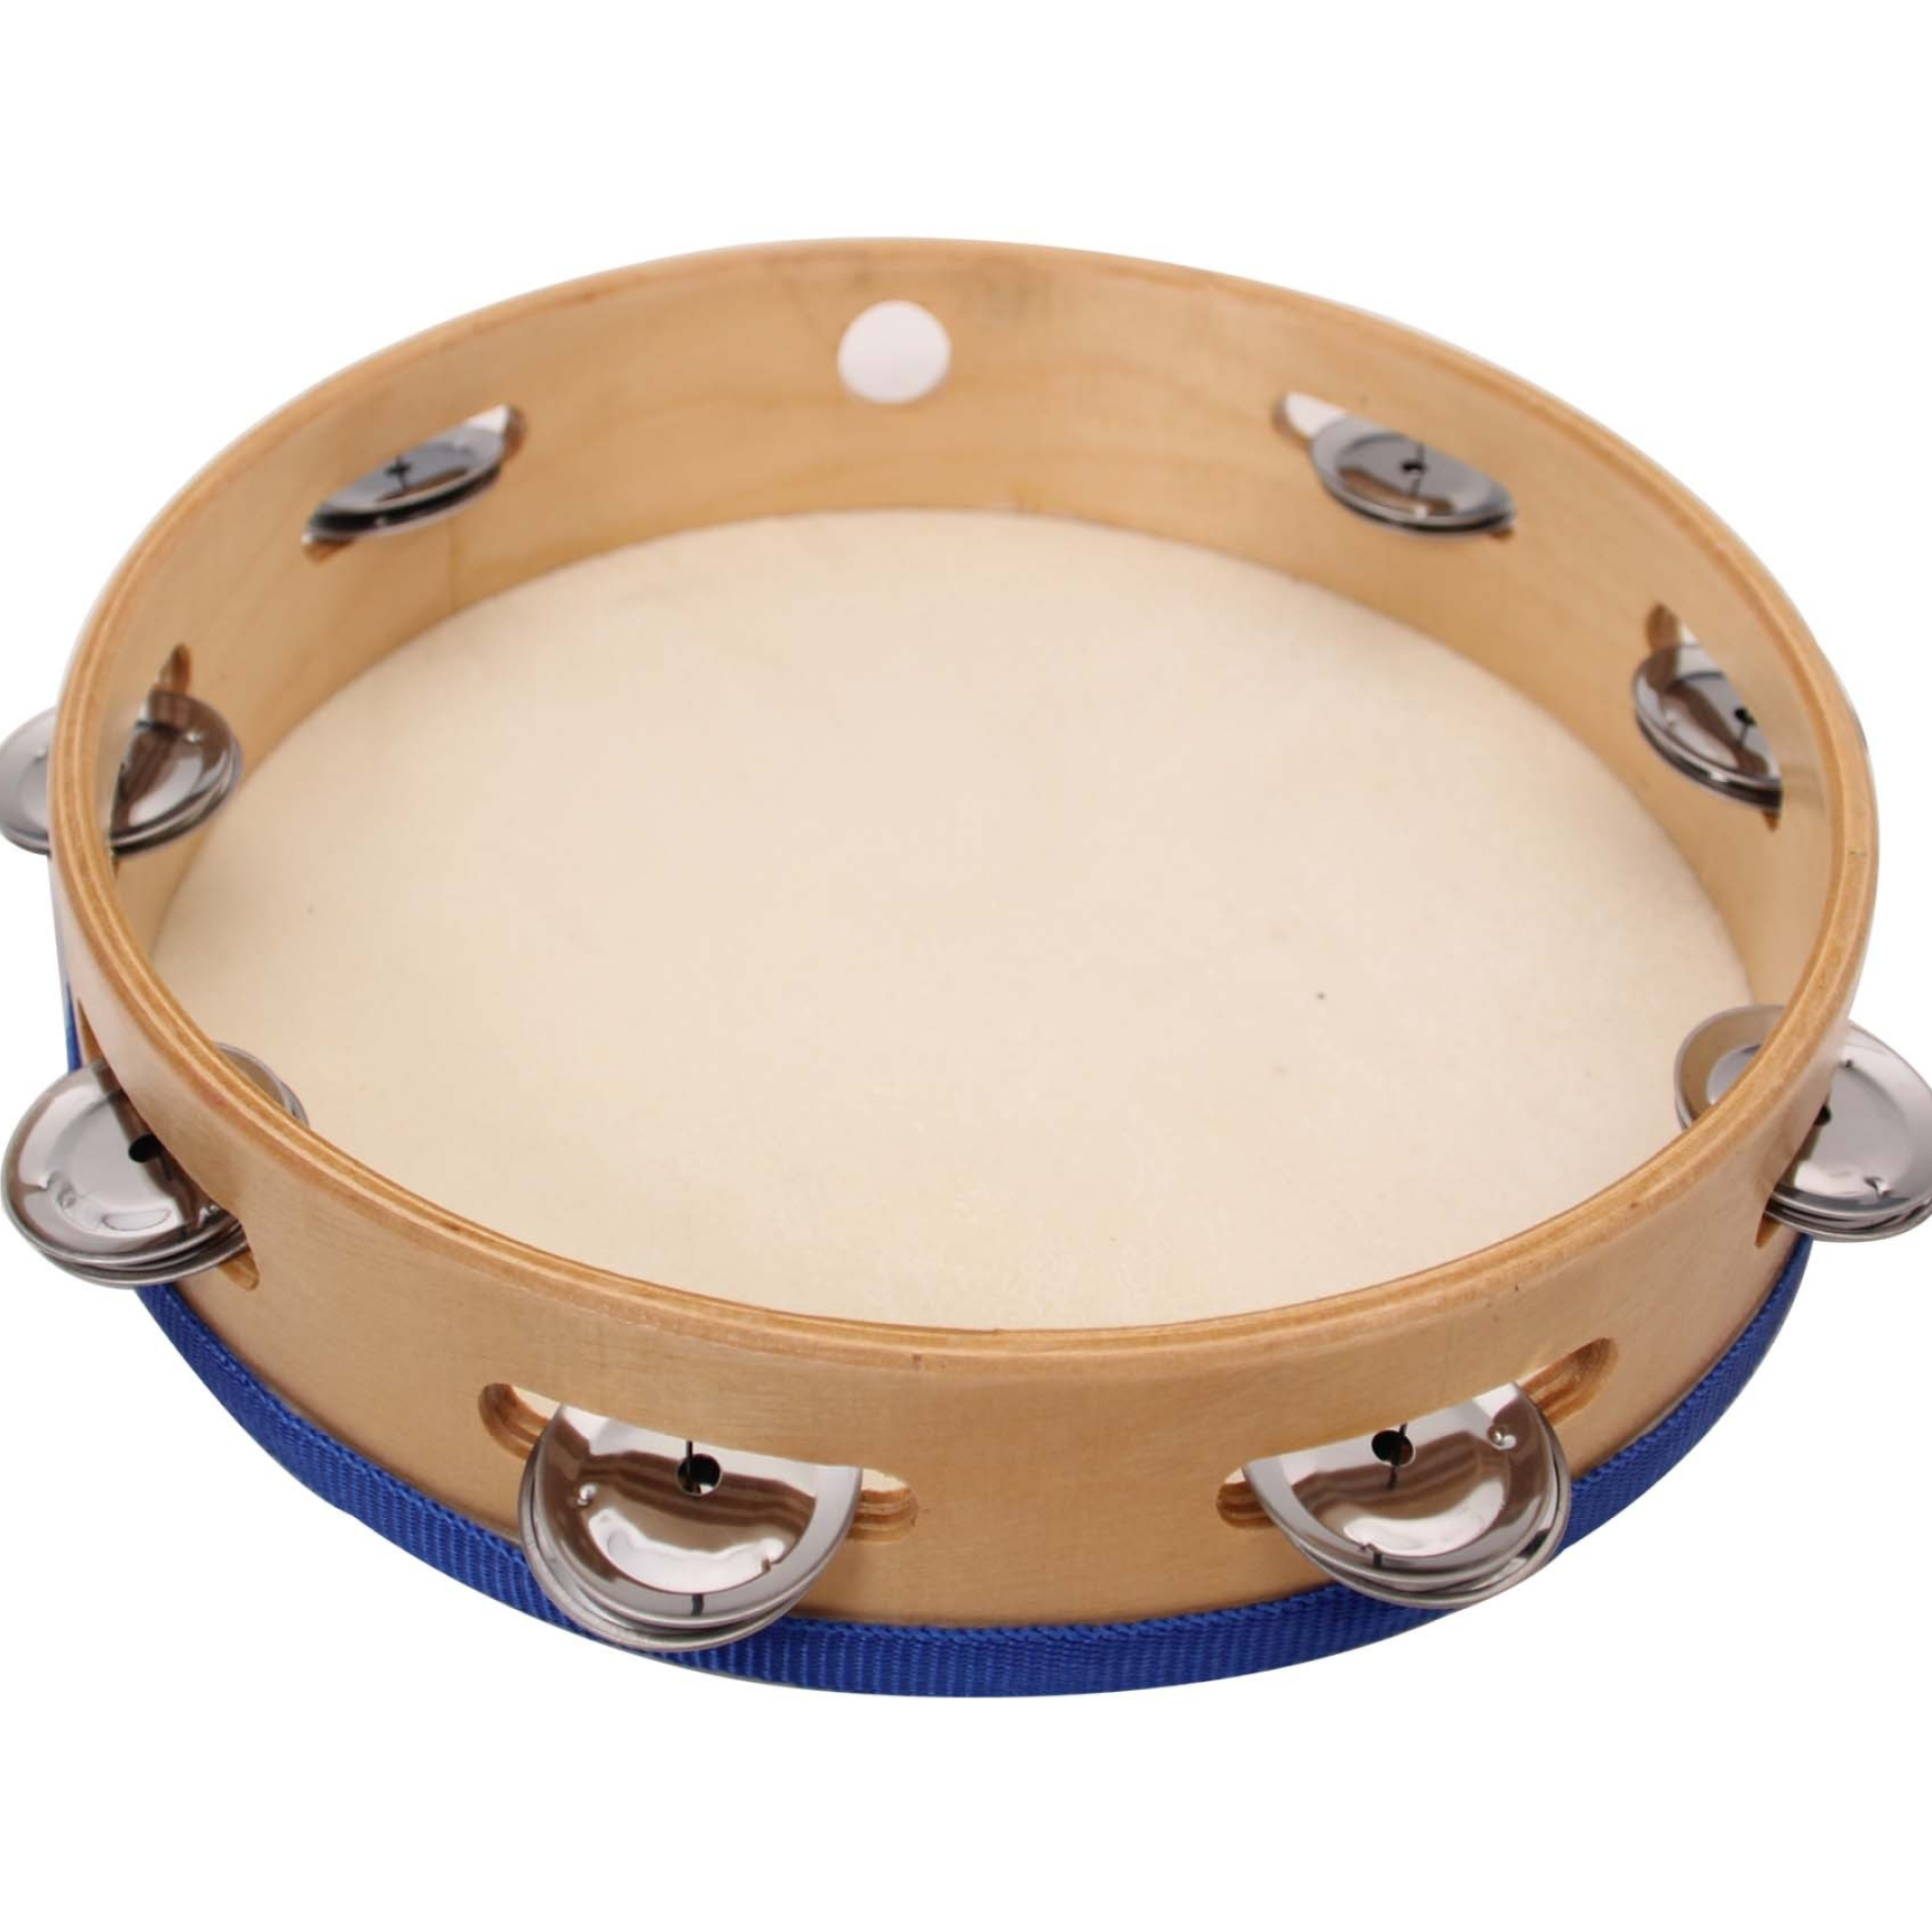 Tambourine: Musical Wood Instrument For Training Playing Skills, Drumhead, Composite Material. 2100x2100 HD Wallpaper.